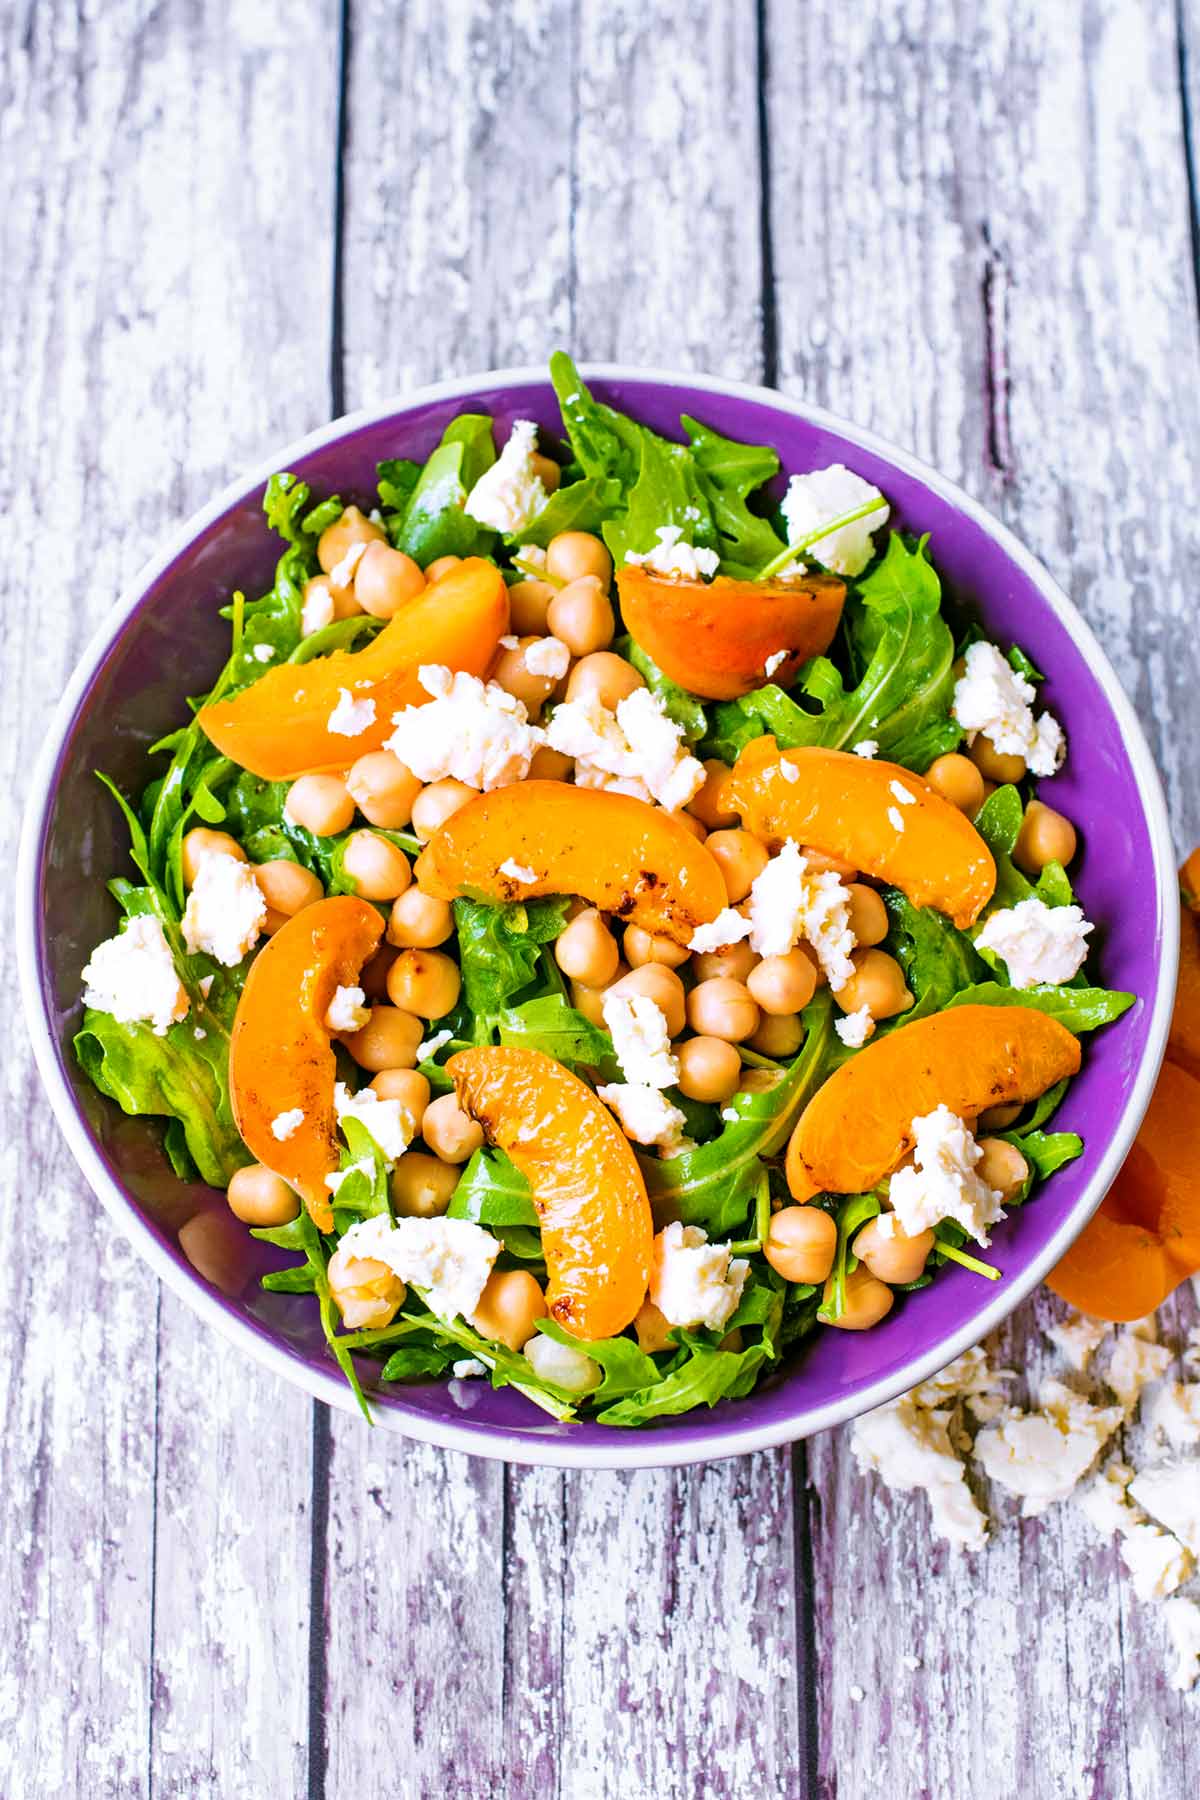 Apricots, chickpeas and feta cheese on a salad.